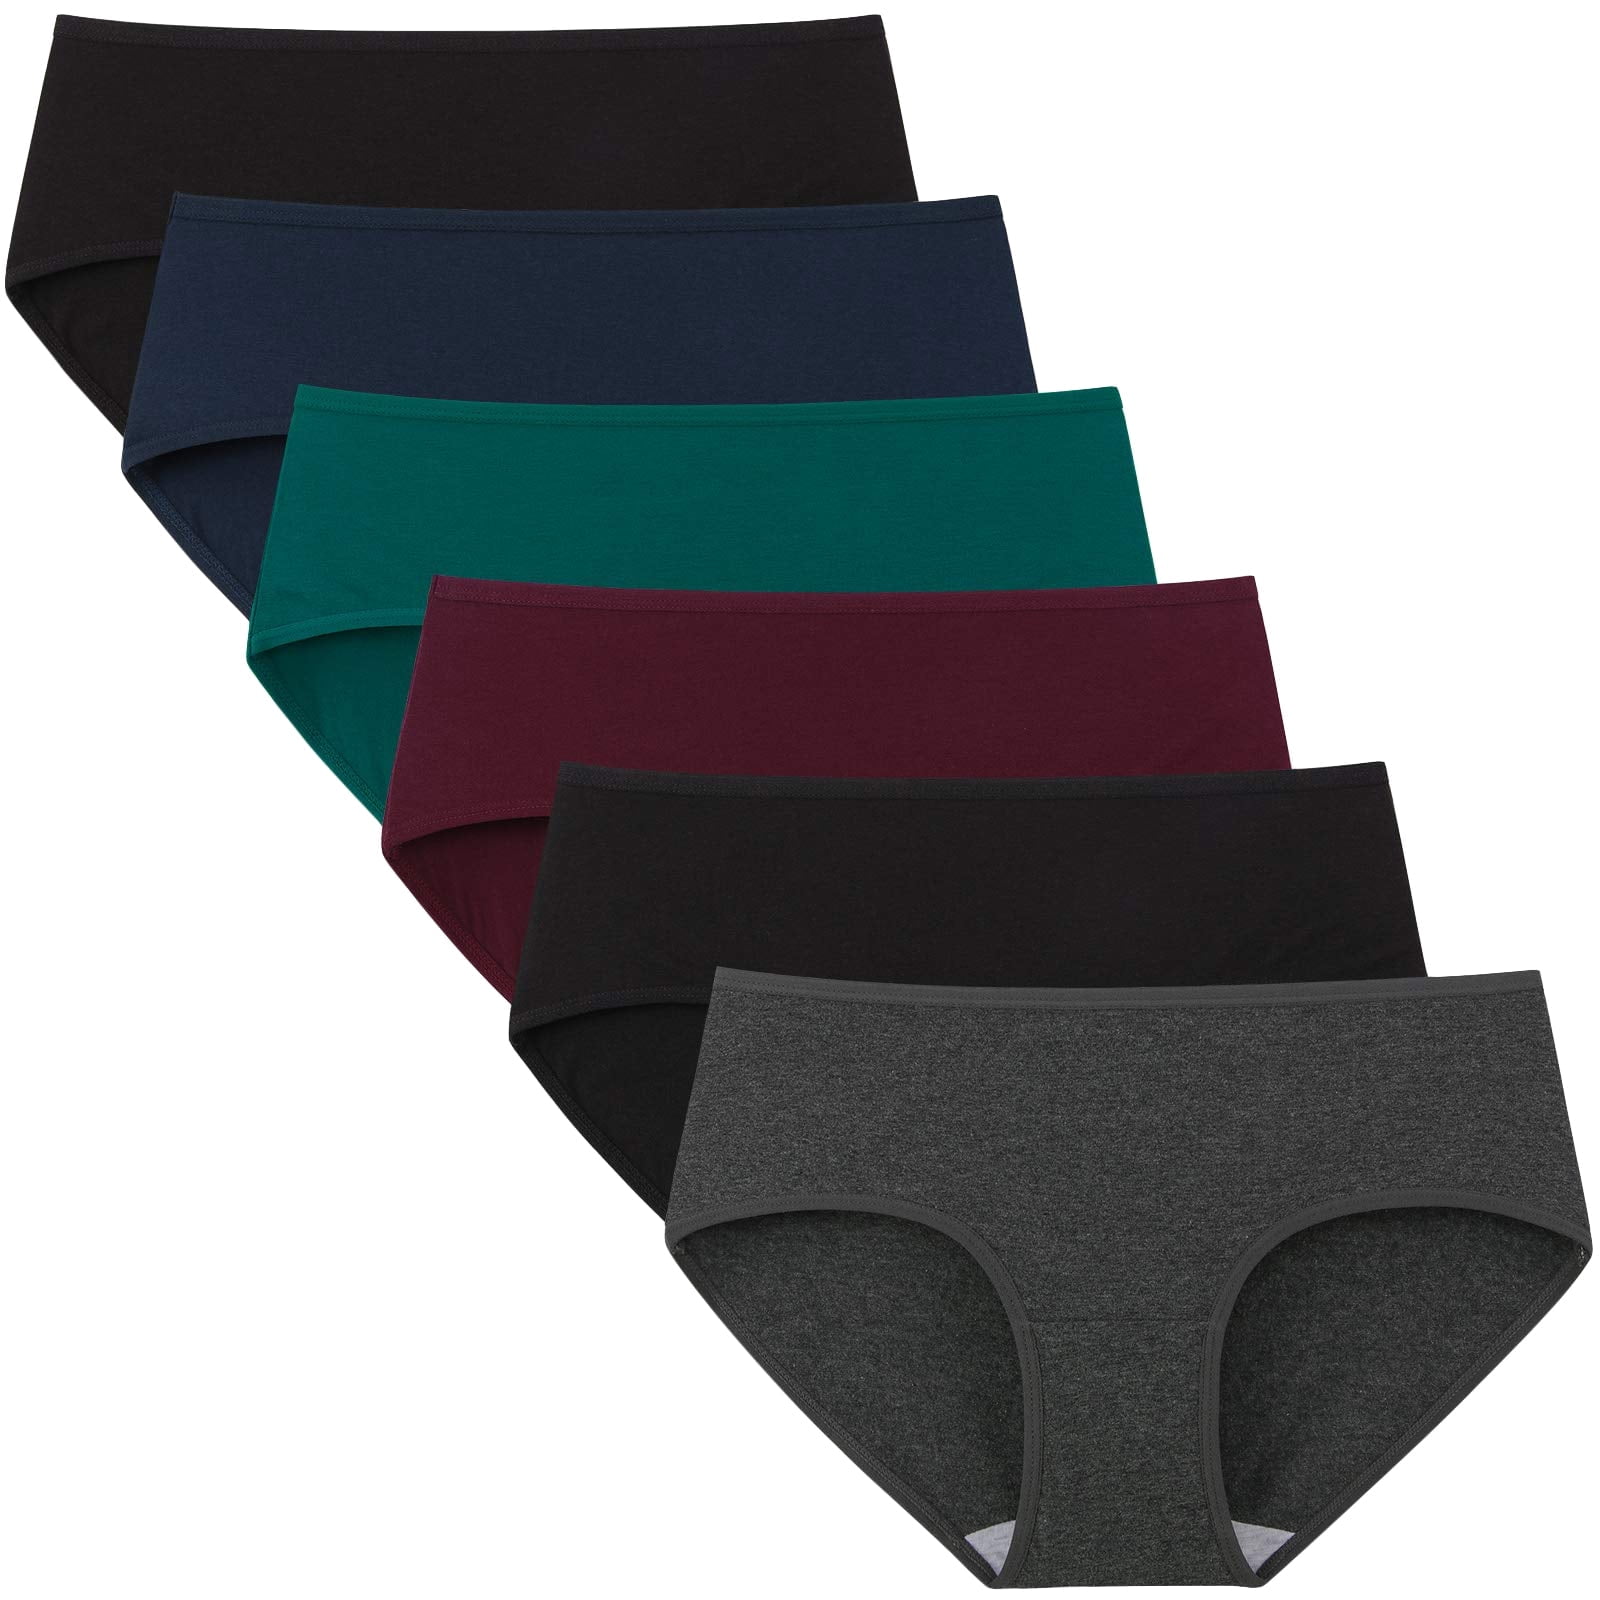 KNITLORD 6 Pack Women's Thongs Underwear Cotton Breathable Panties